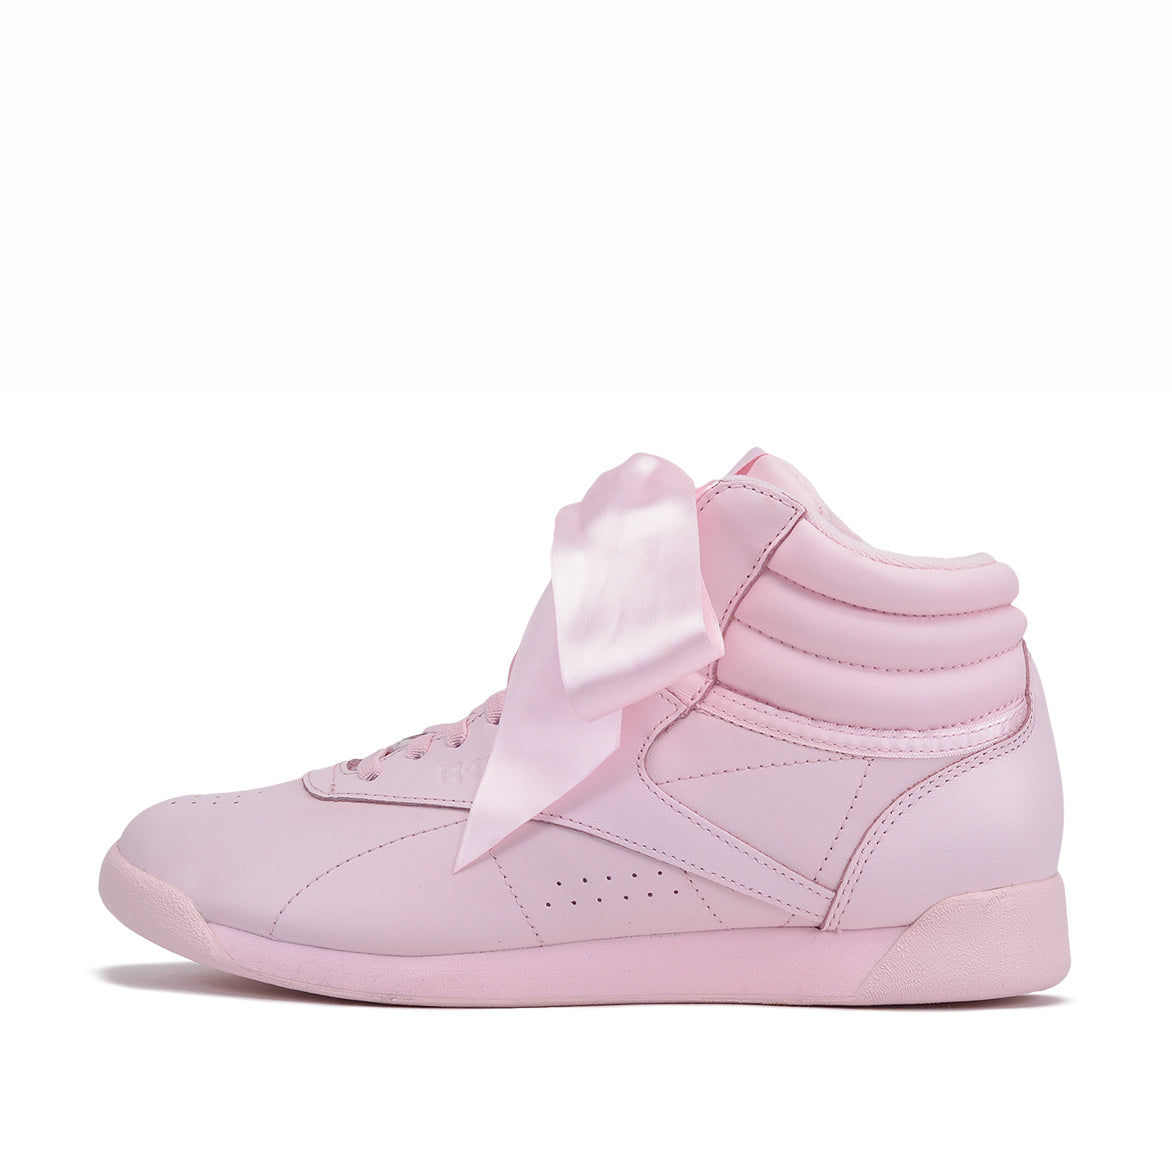 WMNS FREESTYLE HIGH SATIN BOW - PORCELAIN PINK